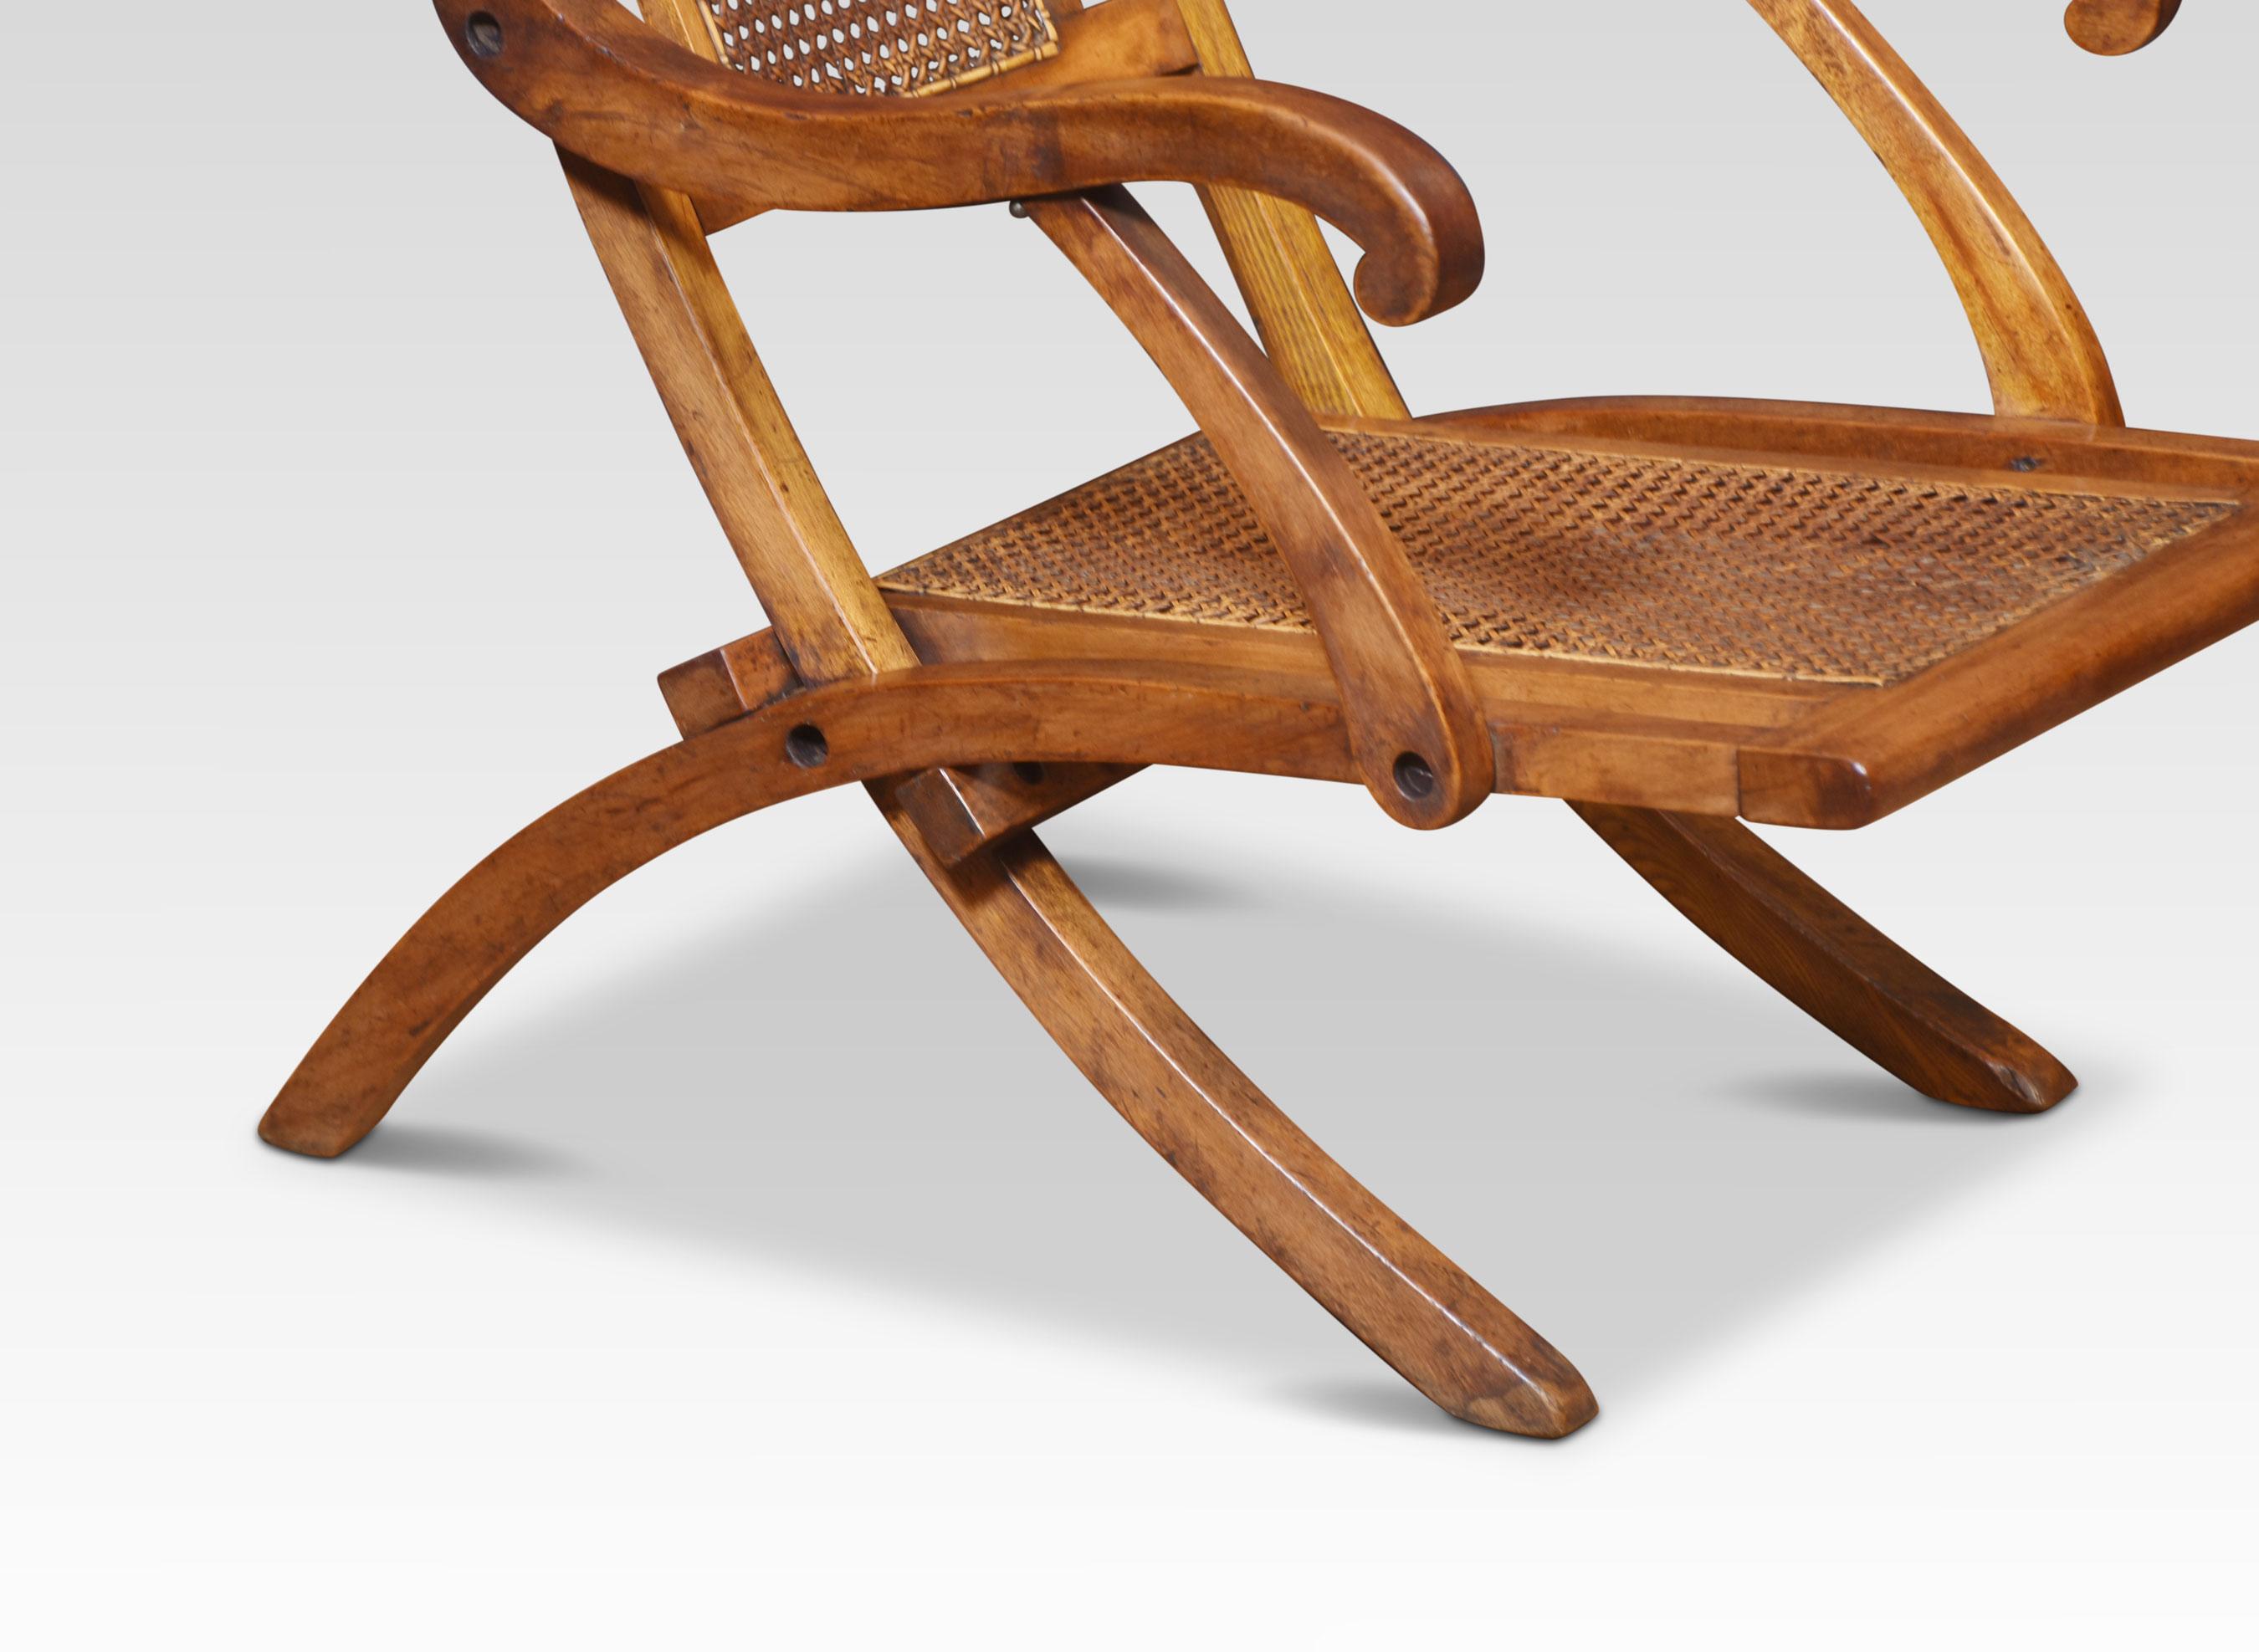 Walnut framed folding Steamer deck chair. The cane work back and low seats, flanked by scrolling arms and splayed legs. The desk chair folds away for very easily for storage.
Dimensions
Height 34 Inches height to seat 11.5 Inches
Width 20.5